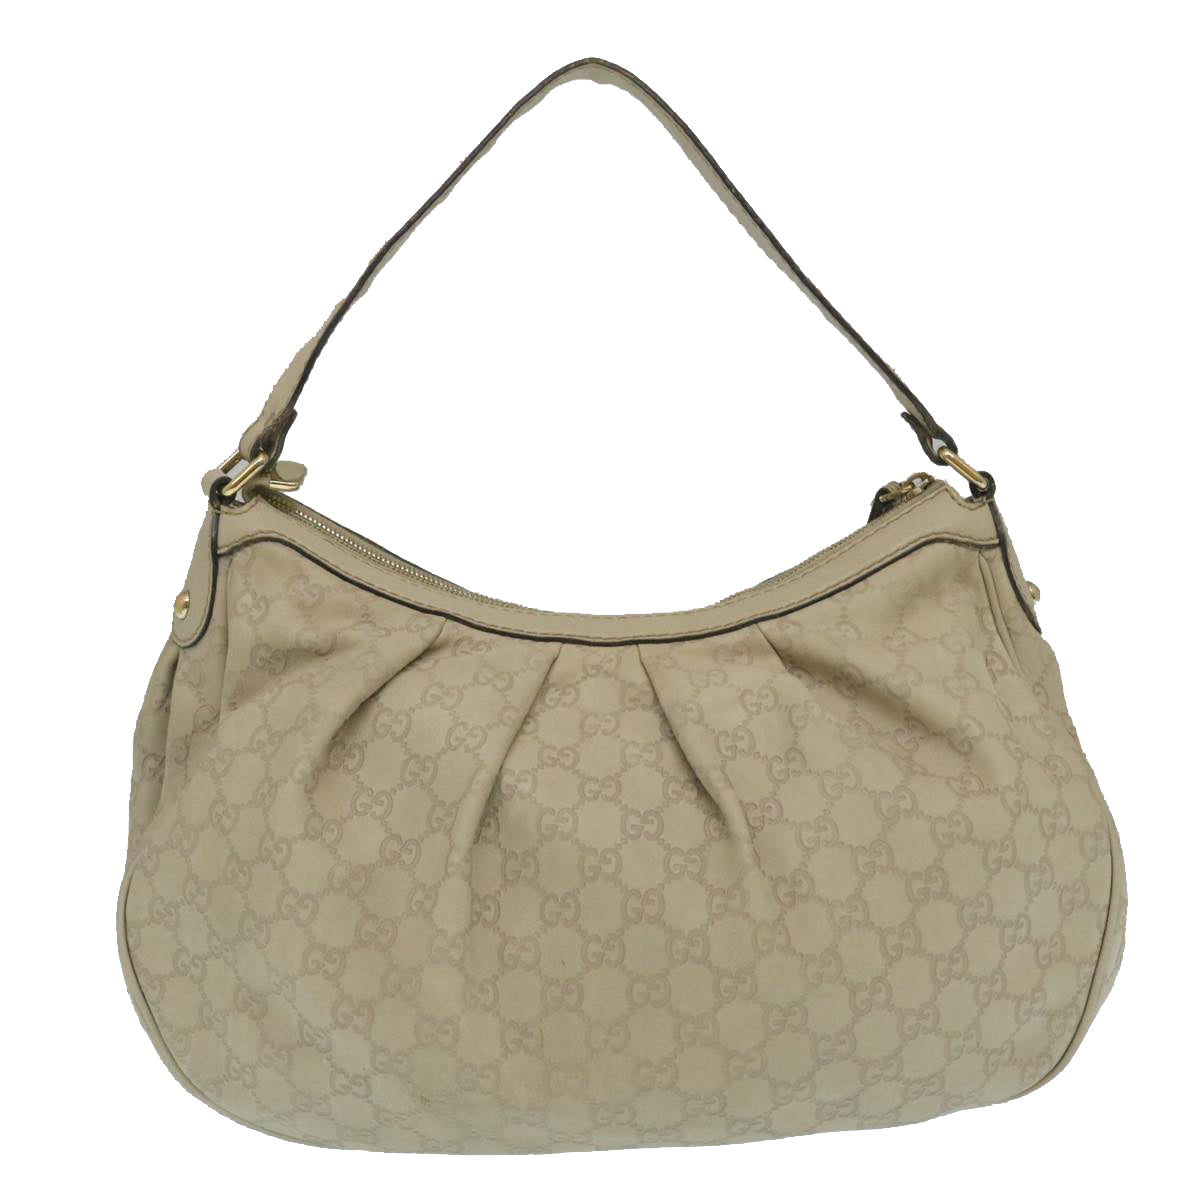 GUCCI Guccissima Shoulder Bag Leather White Auth yk4024